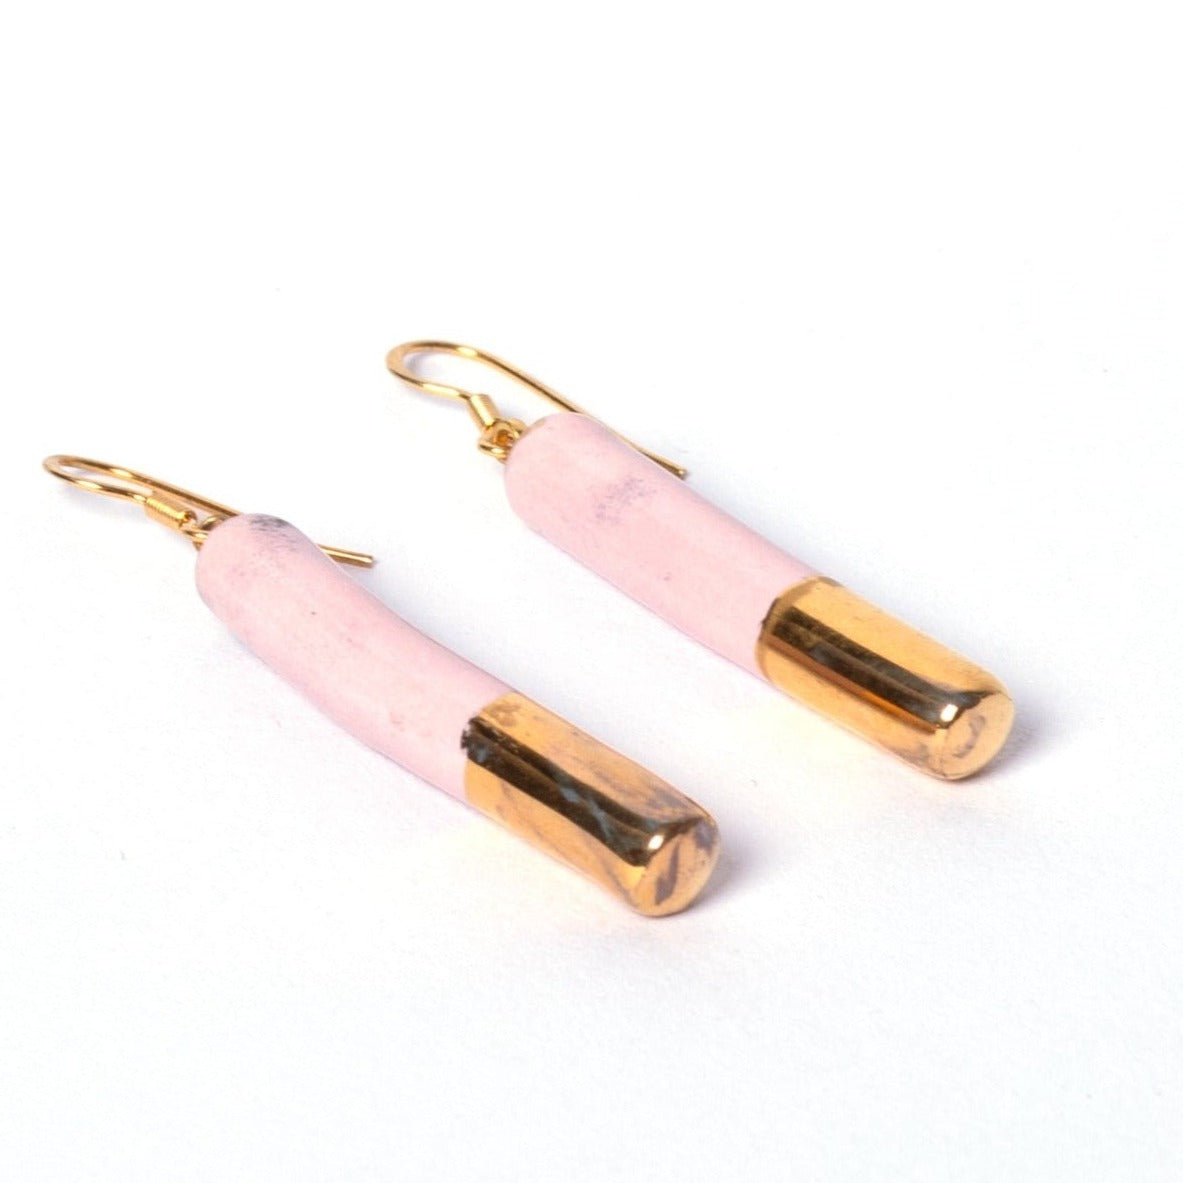 Cylinder earrings - unique pieces